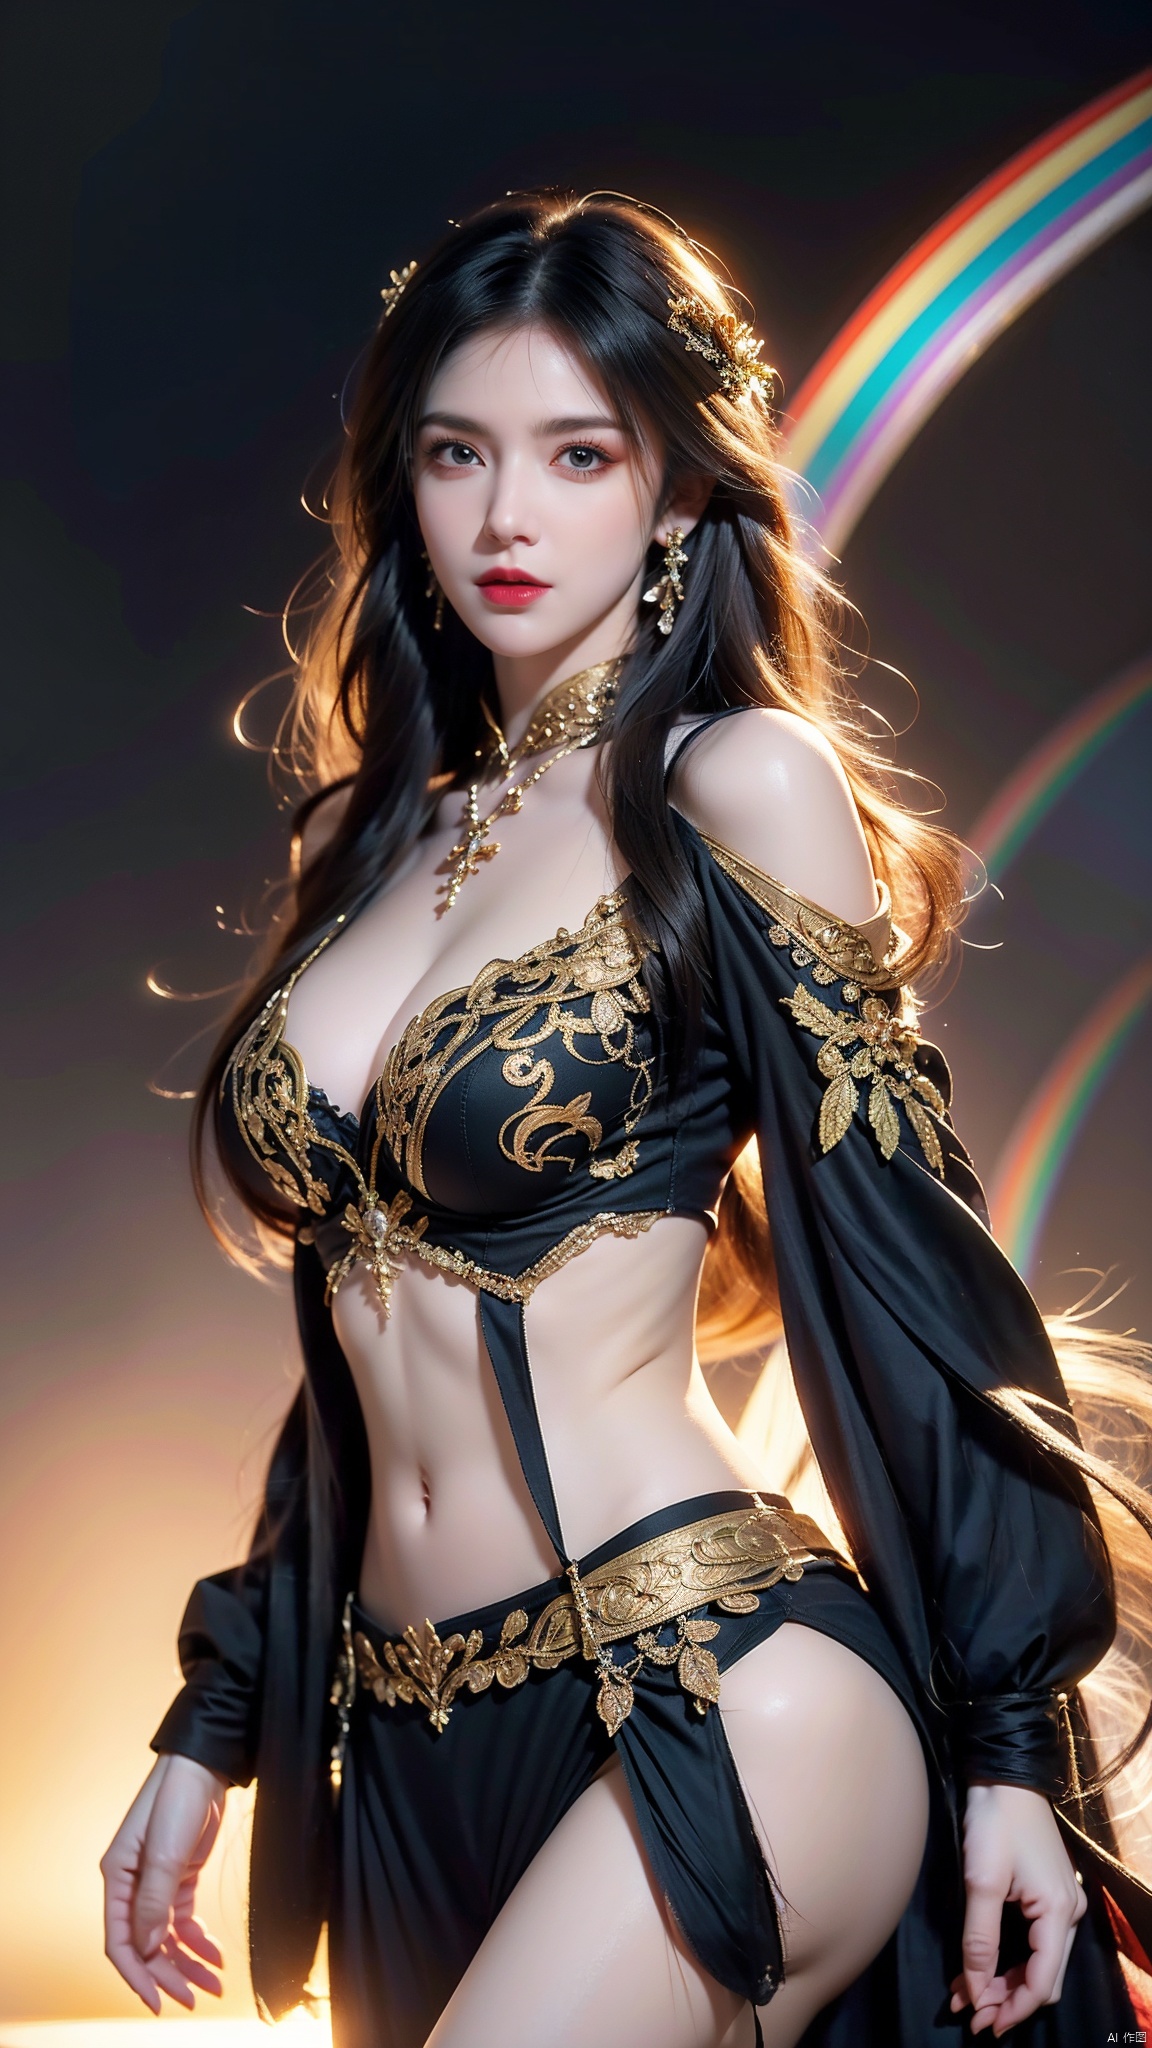  Beautiful woman, well shaped, ample feathers, rainbow colors, gradient colors, feather clothing, complex details, decorations, Baroque, extra long hair, colorful hair colors, wavy, full body, background blurring,(big breasts),